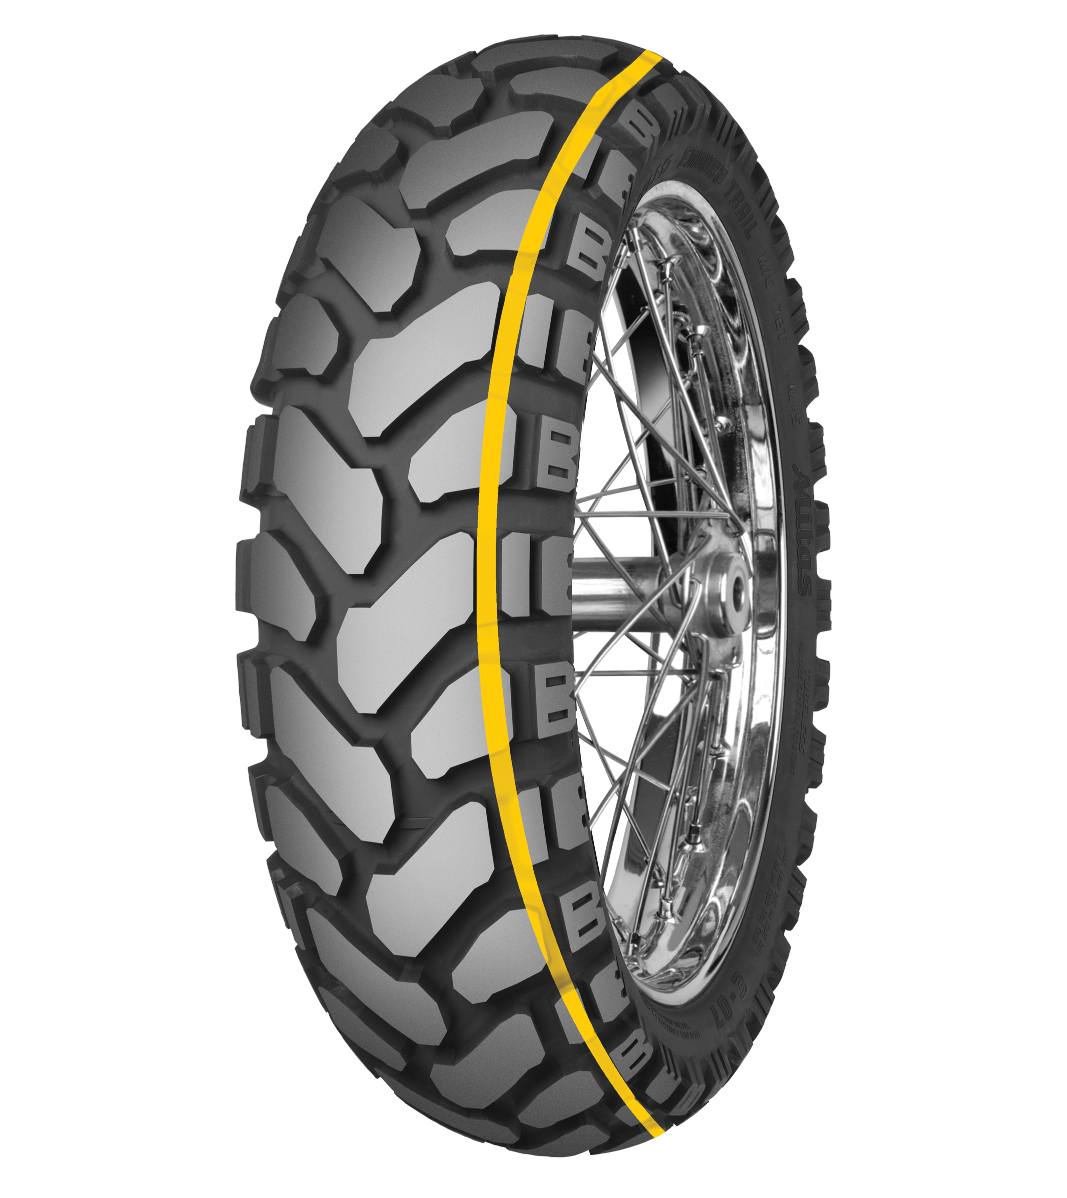 Mitas E-07+ ENDURO TRAIL 150/70B18 Trail ON Trail DAKAR 70T Yellow Tubeless Rear Tire, 224416, 150/70B18, Adventure Touring, E Series, E-07+ Enduro Trail, Rear, Trail, Trail ON, Tires - Imported and distributed in North &amp; South America by Lindeco Genuine Powersports - Premier Powersports Equipment and Accessories for Motorcycle Enthusiasts, Professional Riders and Dealers.